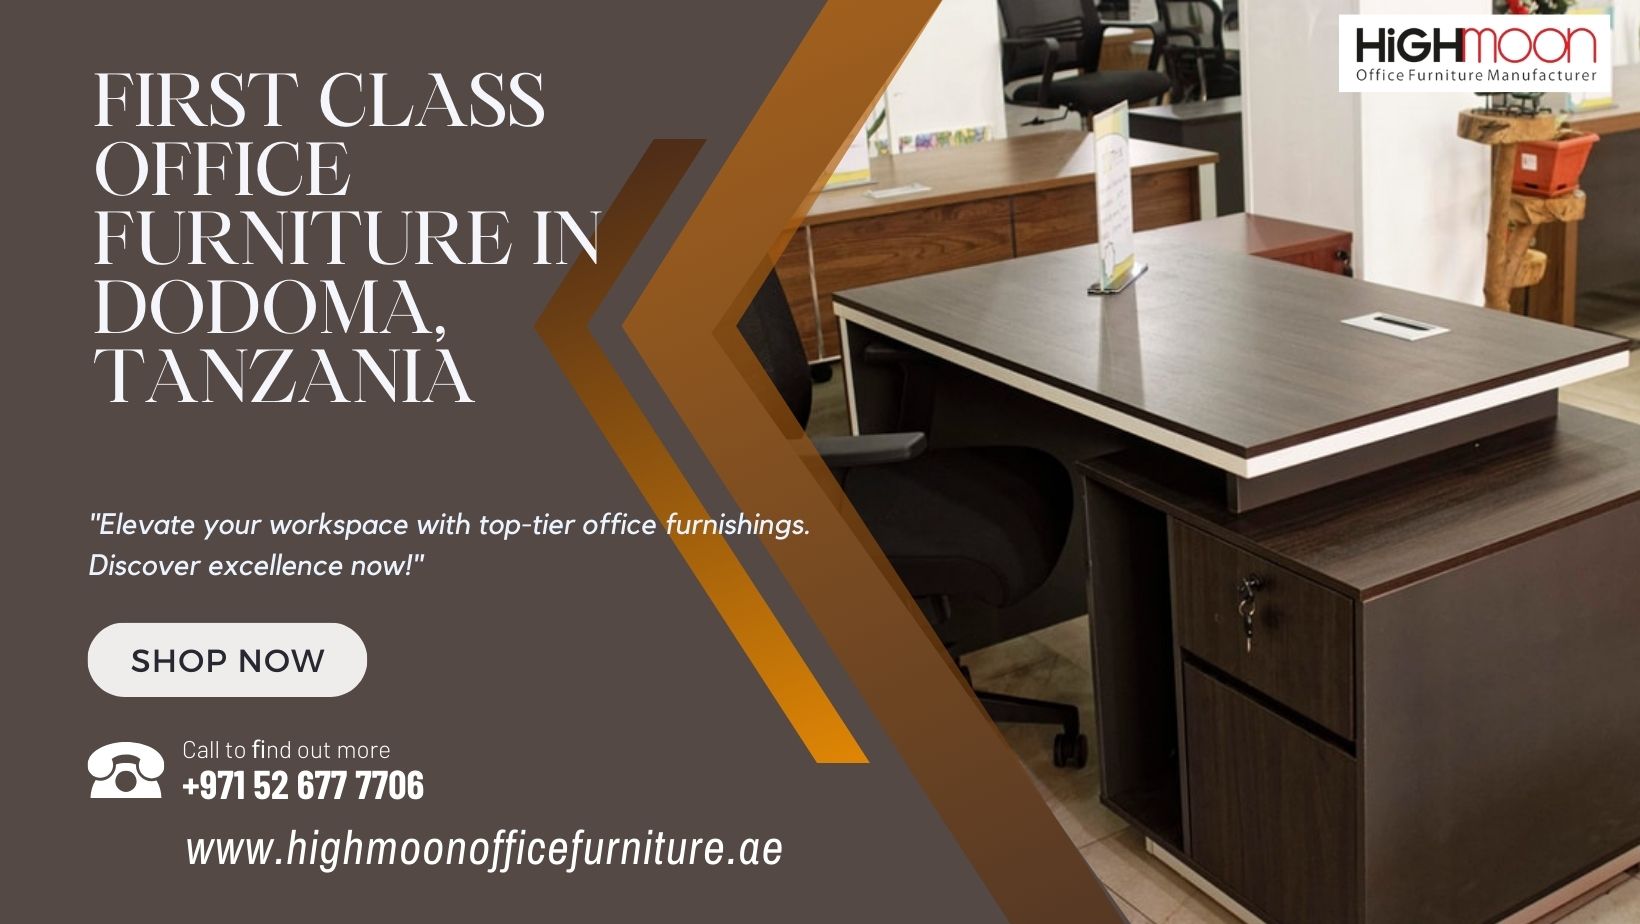 First Class Office Furniture Dodoma